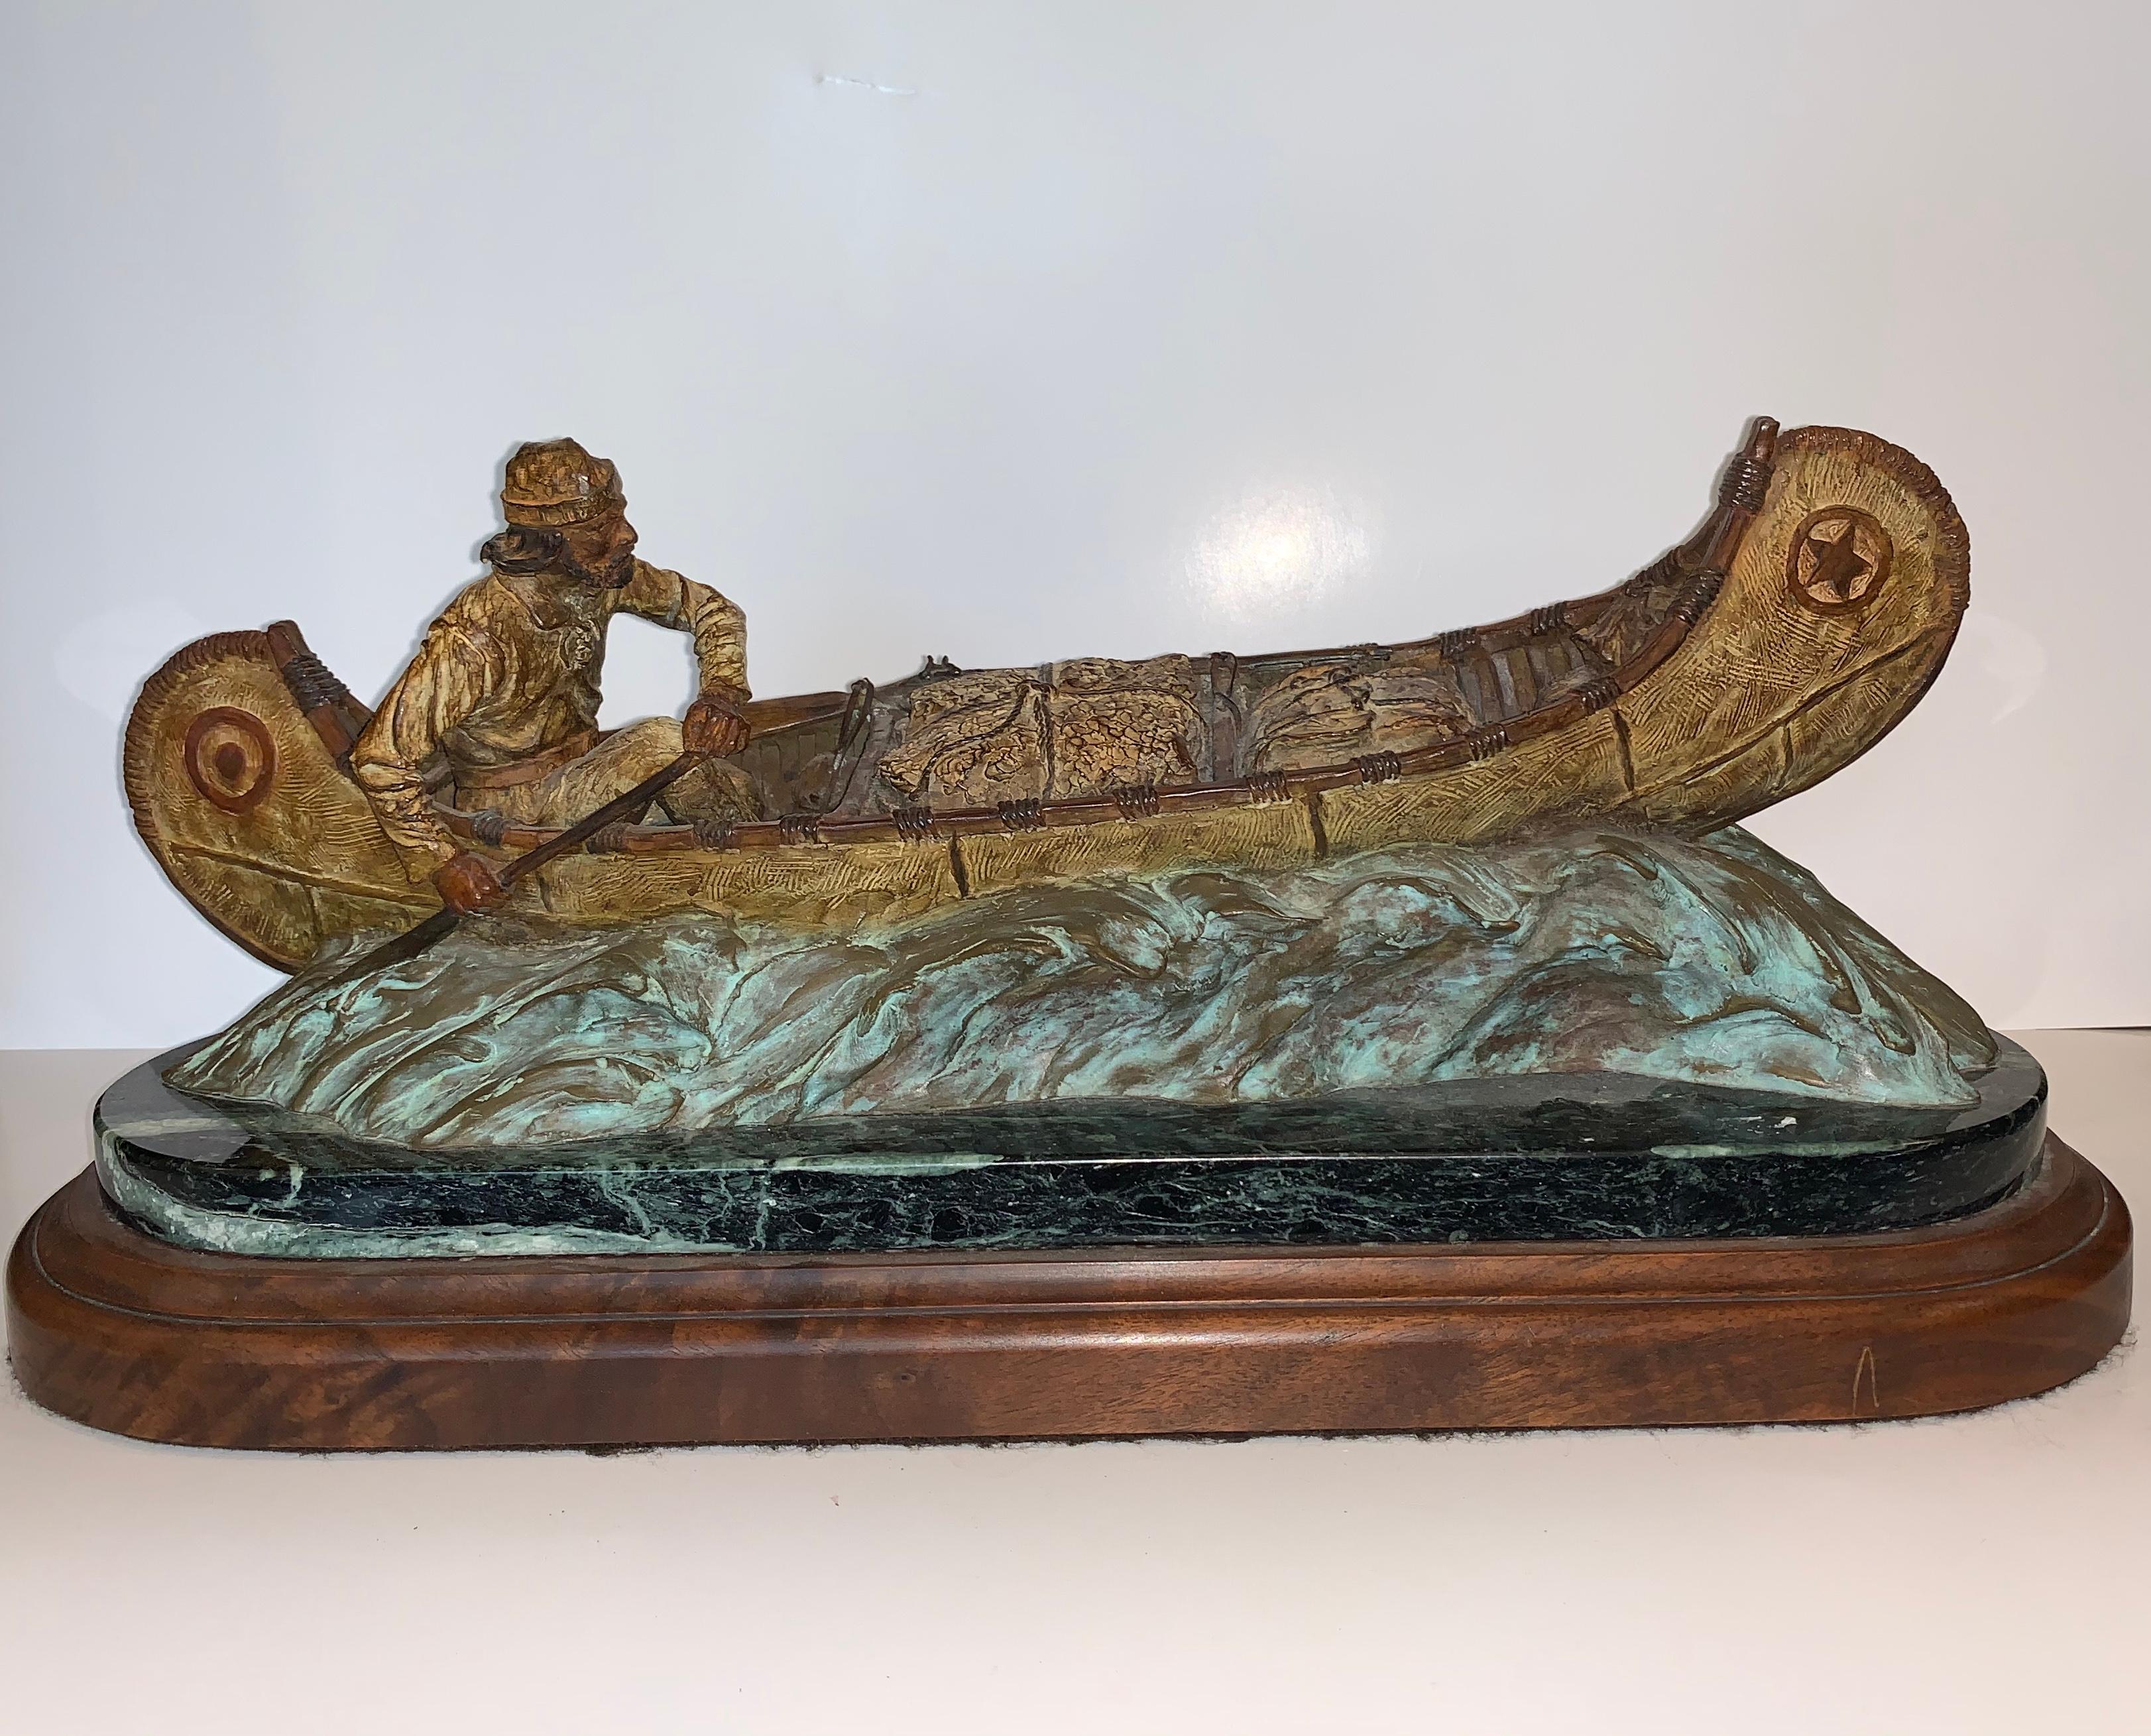 Bill Nebeker Figurative Sculpture - Edition 26/30 American Indian Rowing Canoe "Bound for Hudsons' Bay"